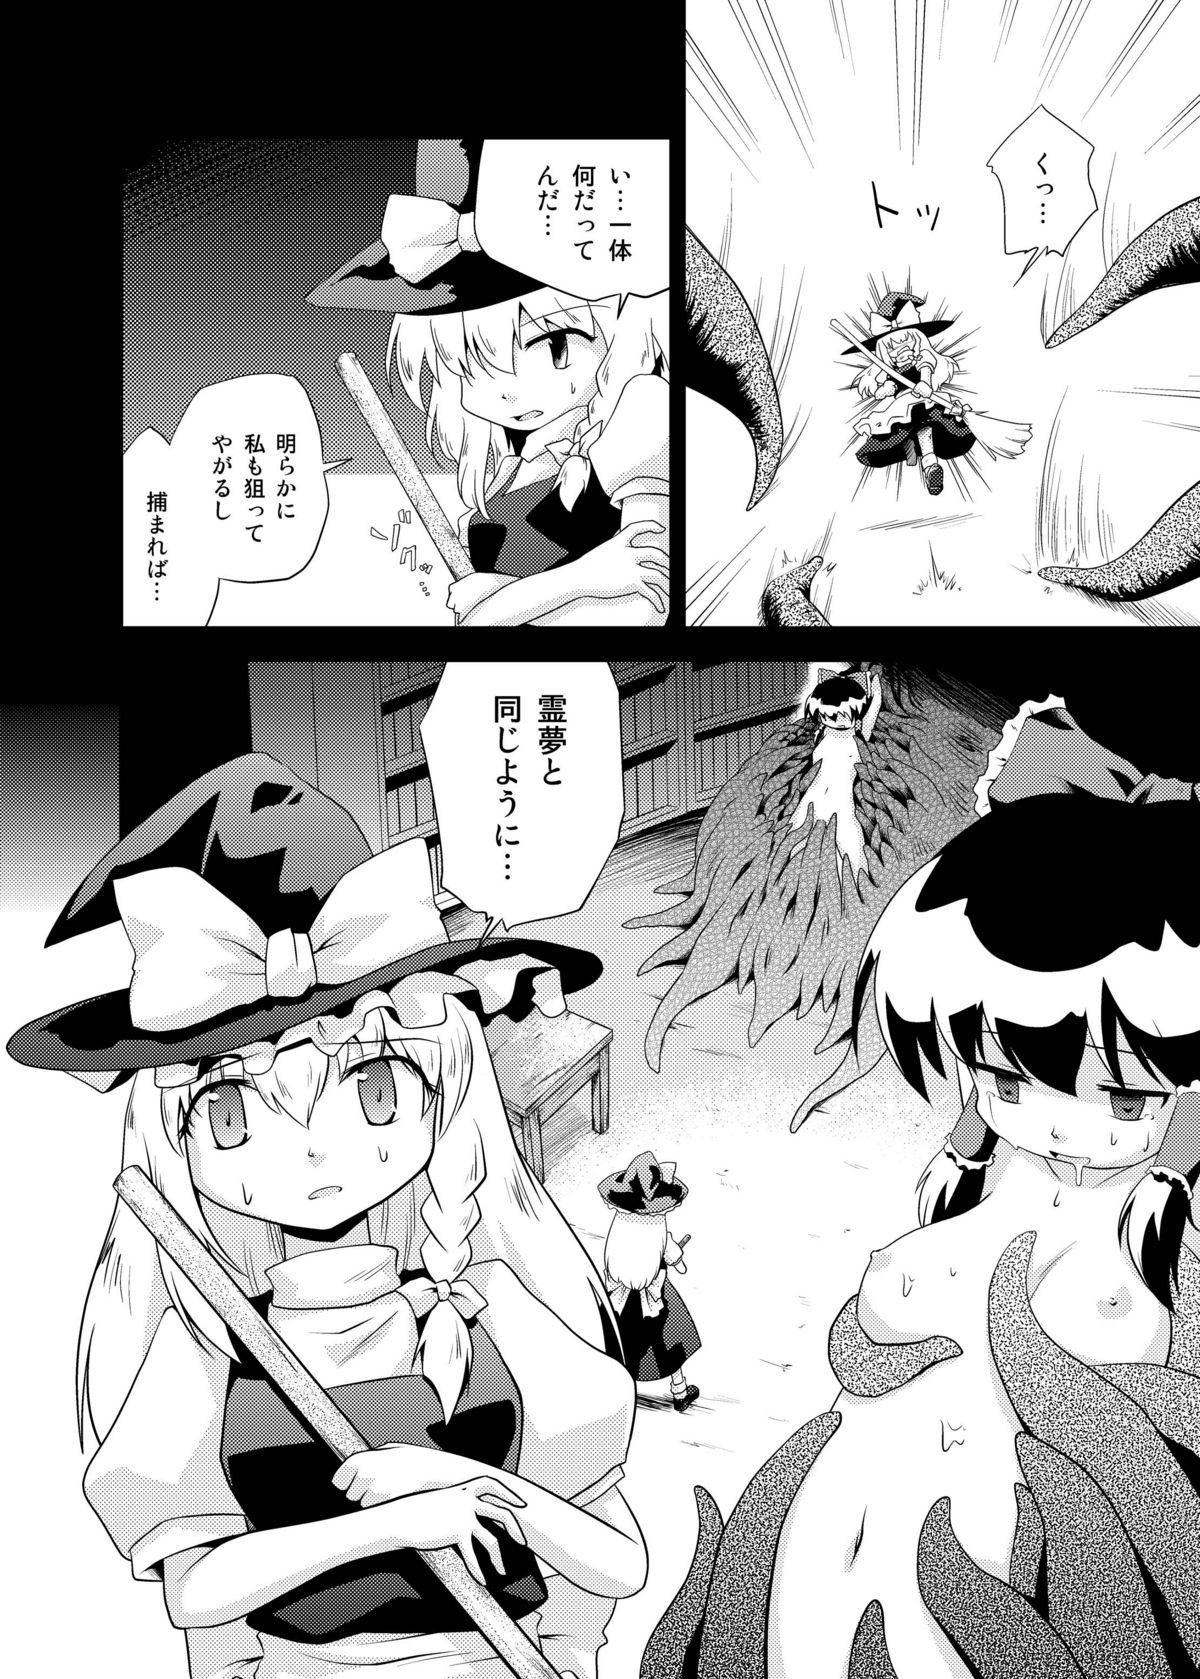 Jerking DISARM CLOTHES - Touhou project 18 Porn - Page 3